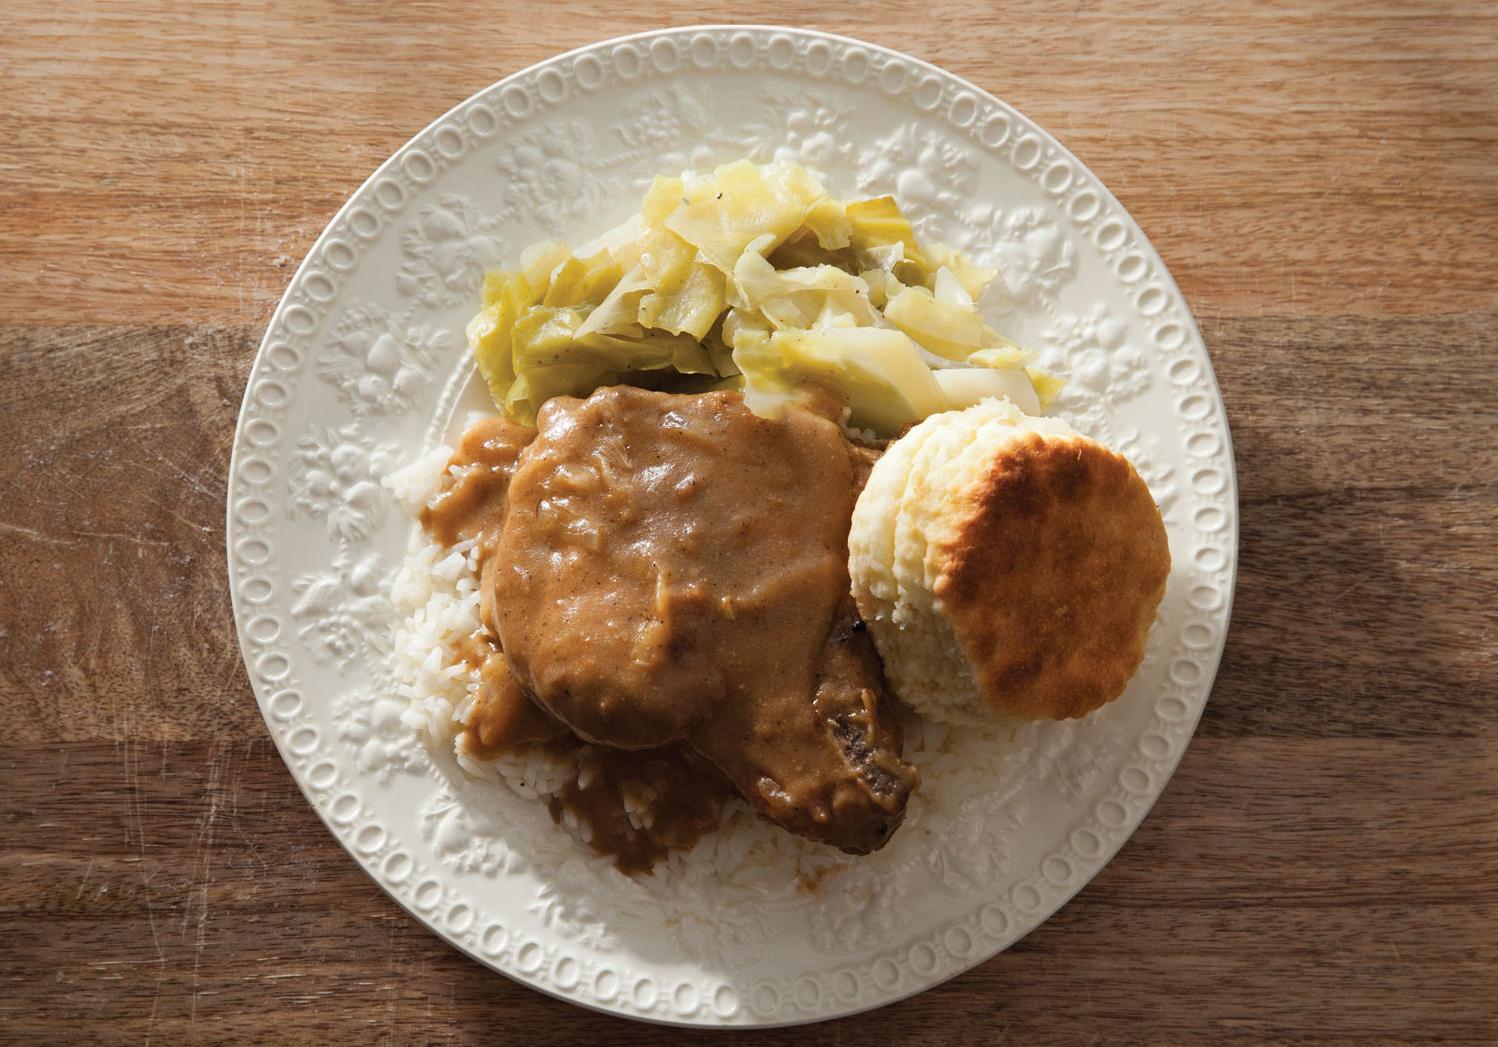  Say goodbye to bland and boring pork chops, and say hello to this delicious Southern-style dish.